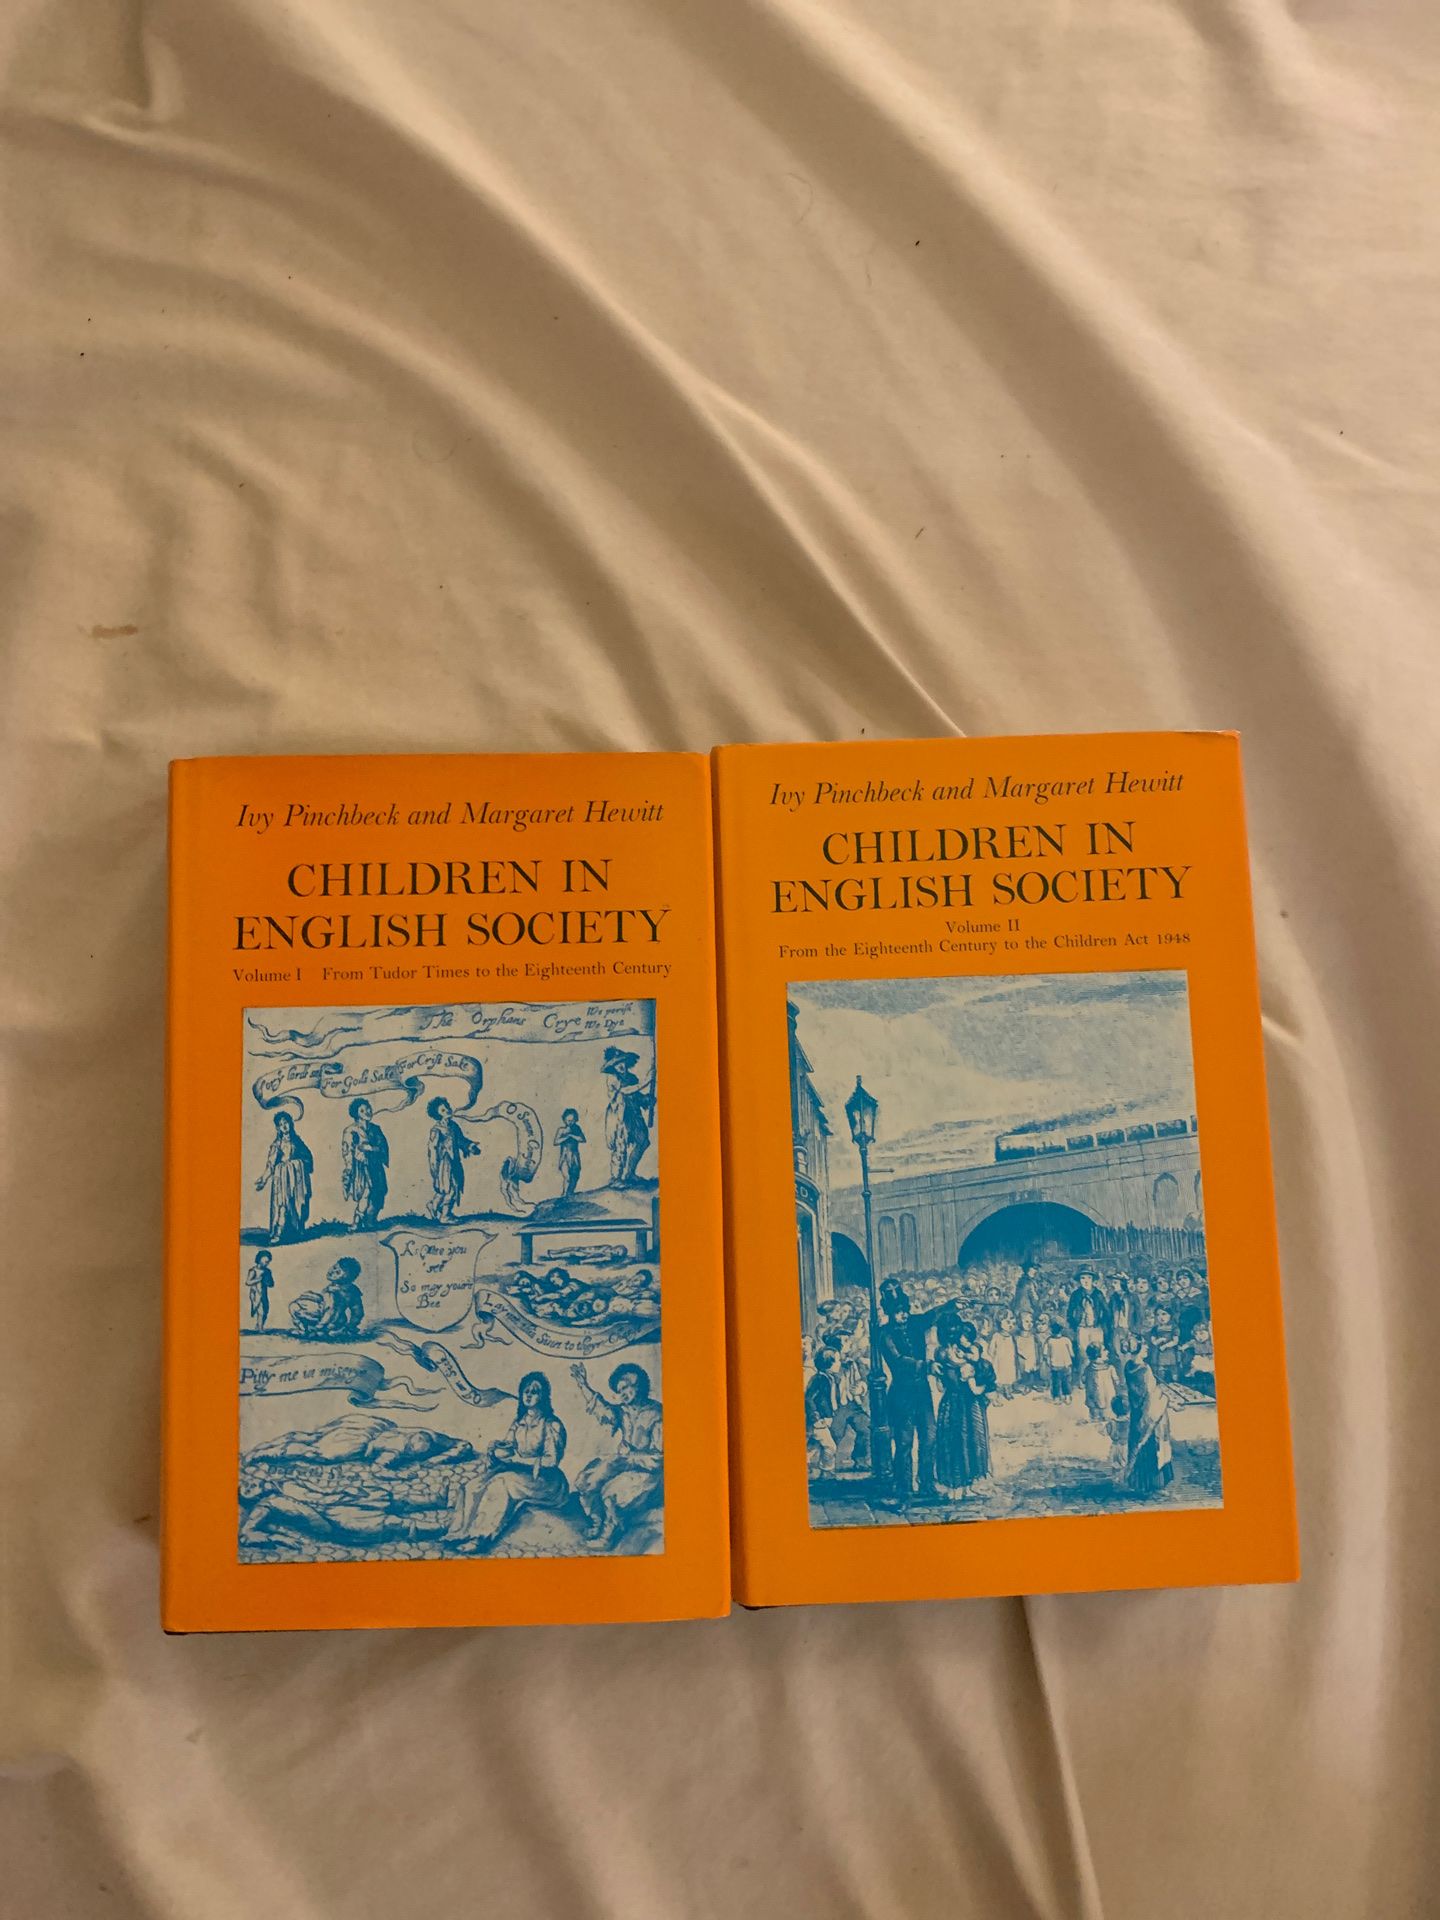 Children in English Society volume 1 and 2- by Ivy Pinchbeck and Margaret Hewitt- Printed 1972 and 1973